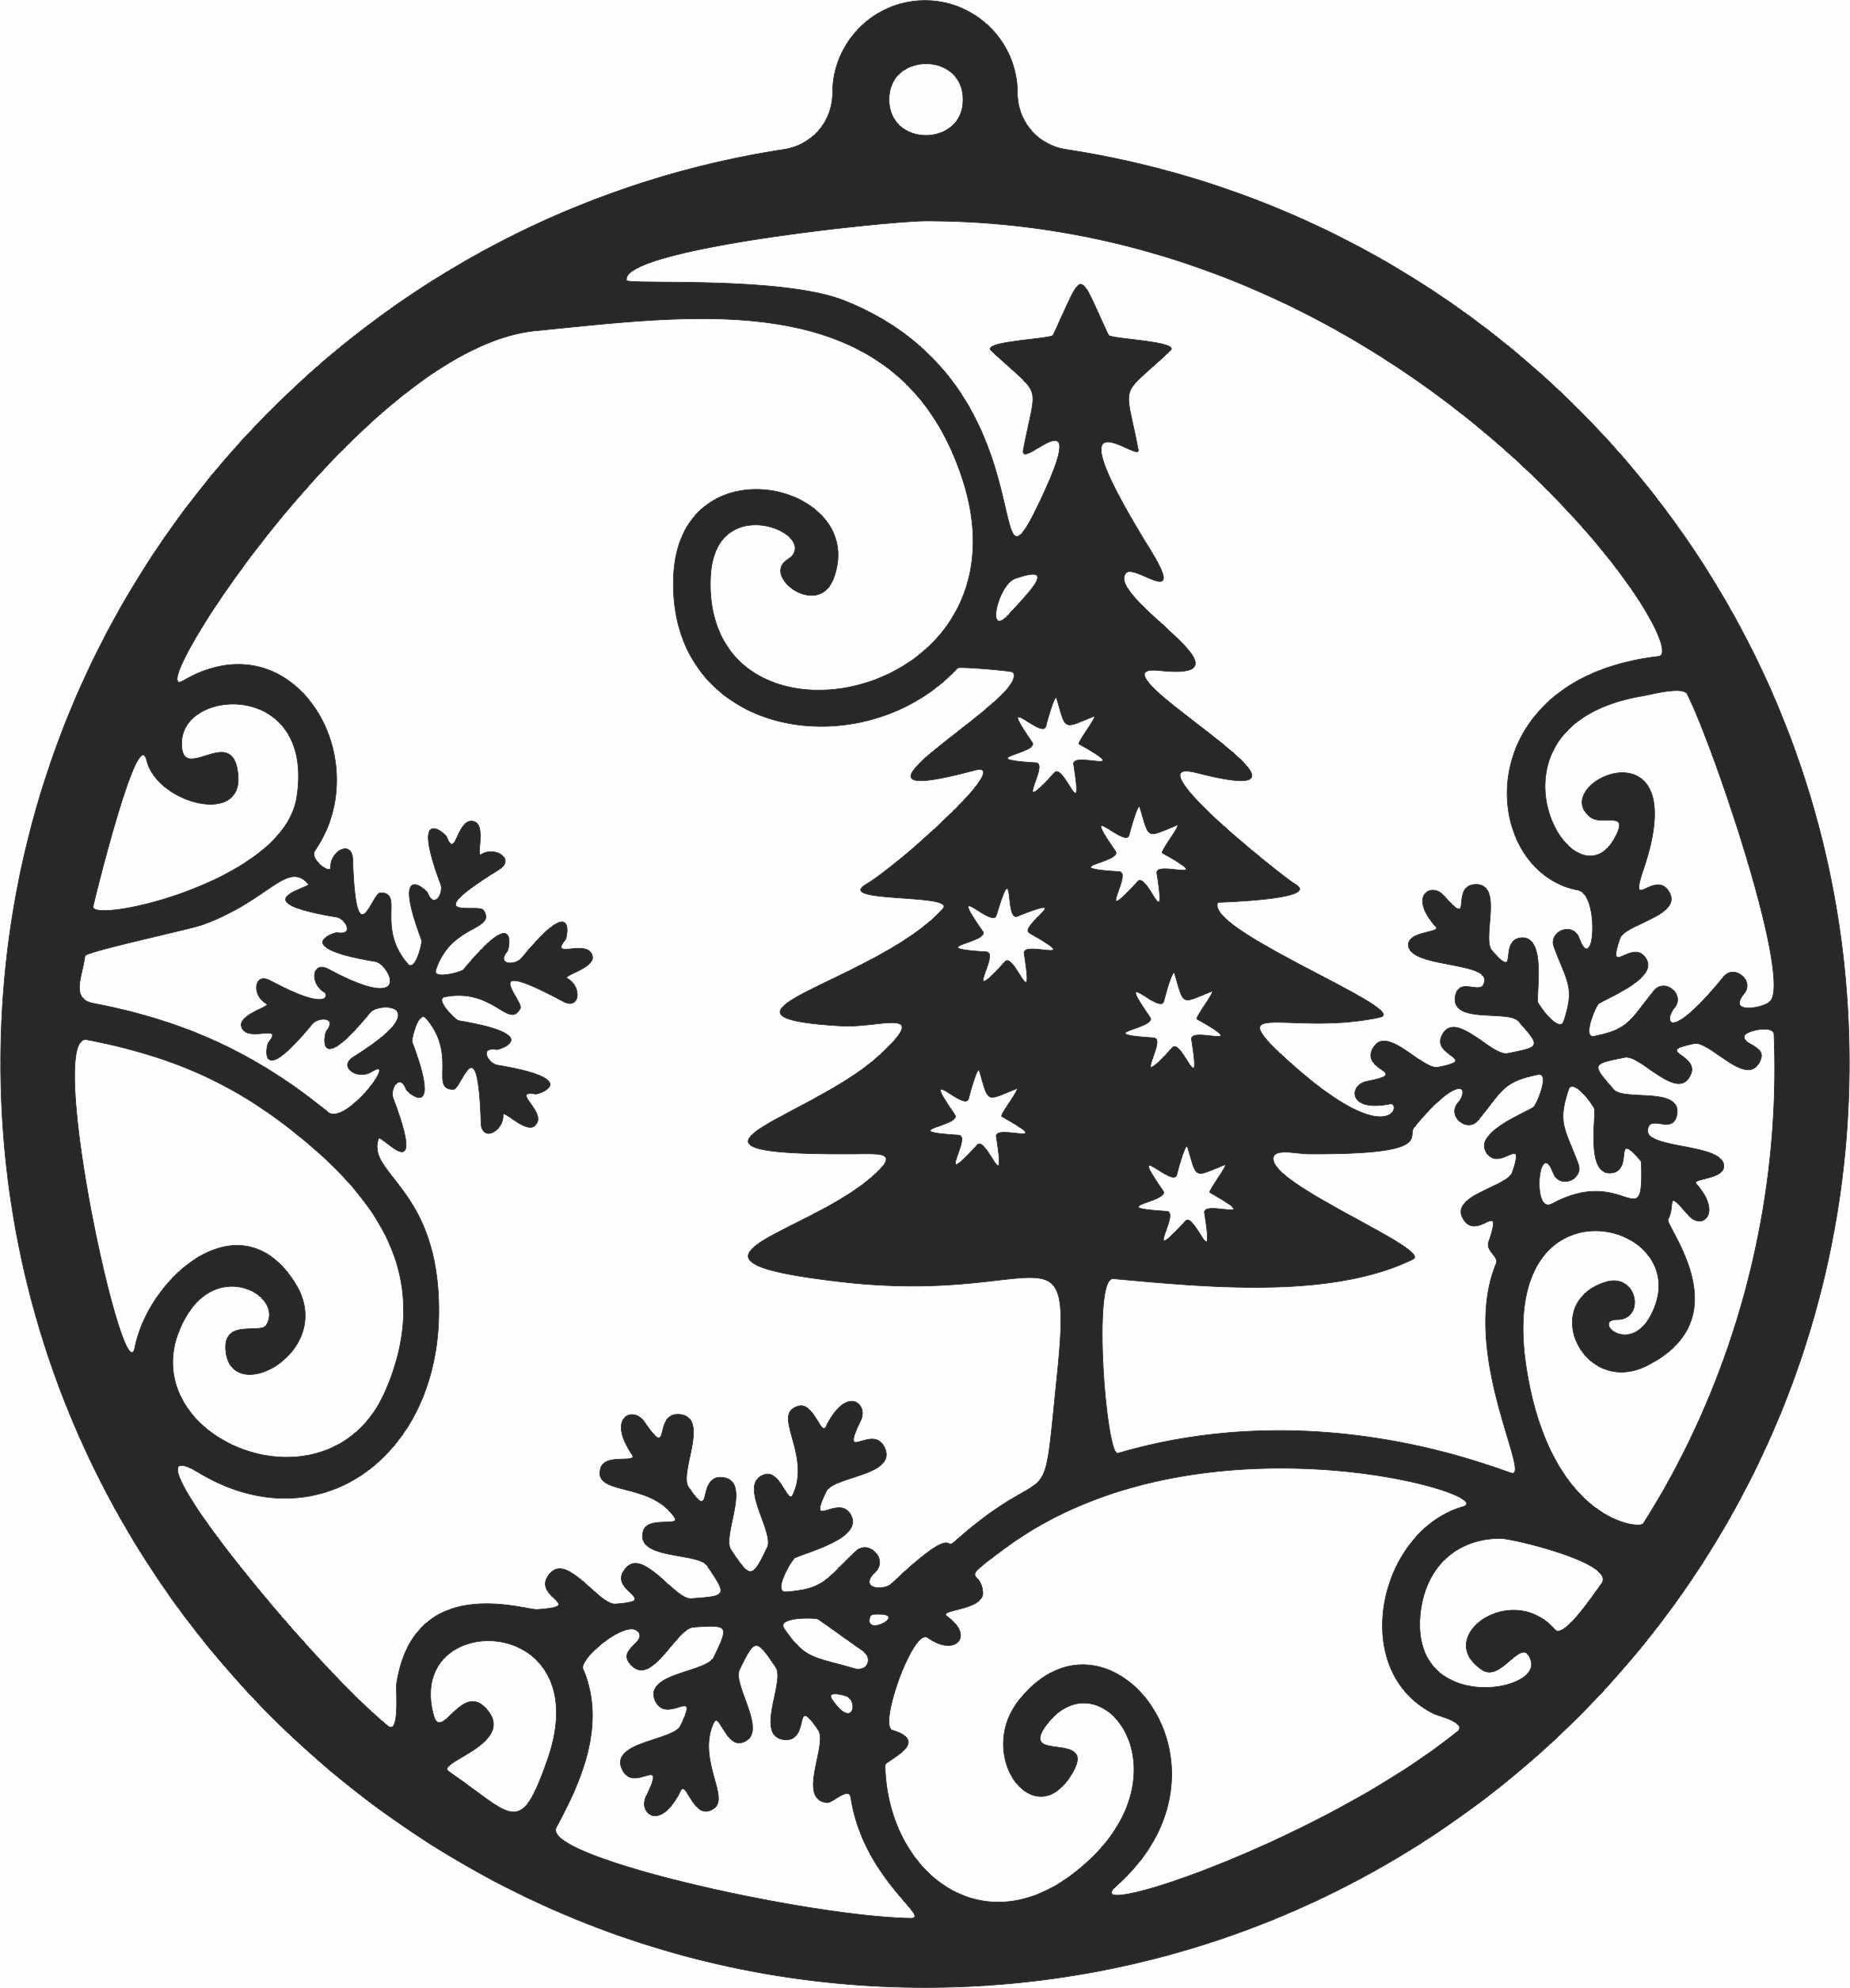 Merry christmas ornaments tree decoration - For Laser Cut DXF CDR SVG ...